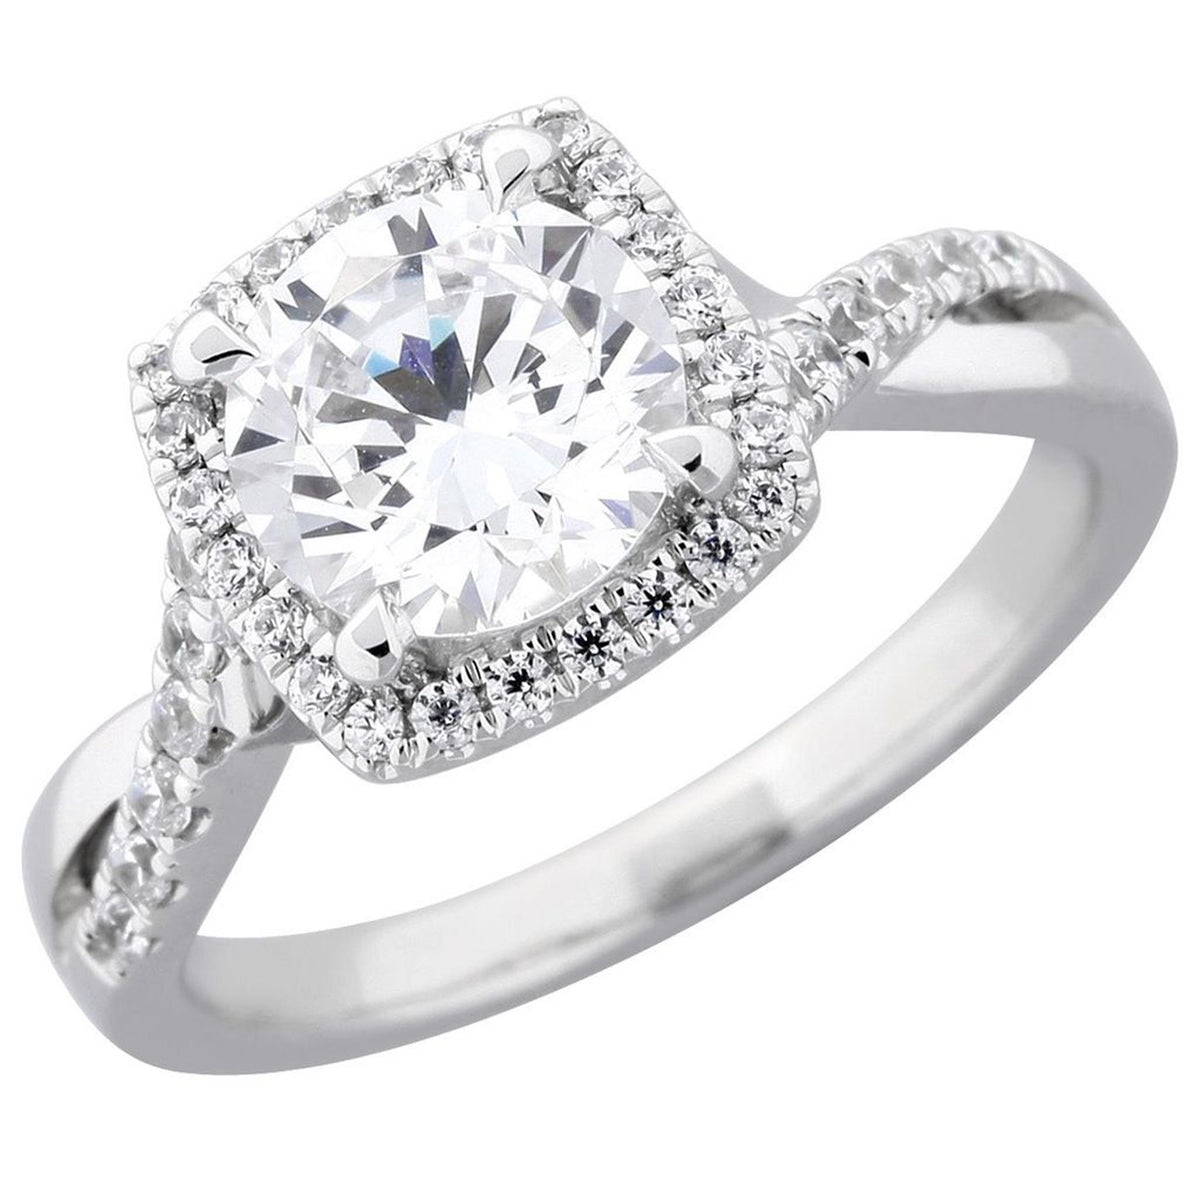 18Kt White Gold Halo Engagement Ring With 1.01ct Natural Center Diamond